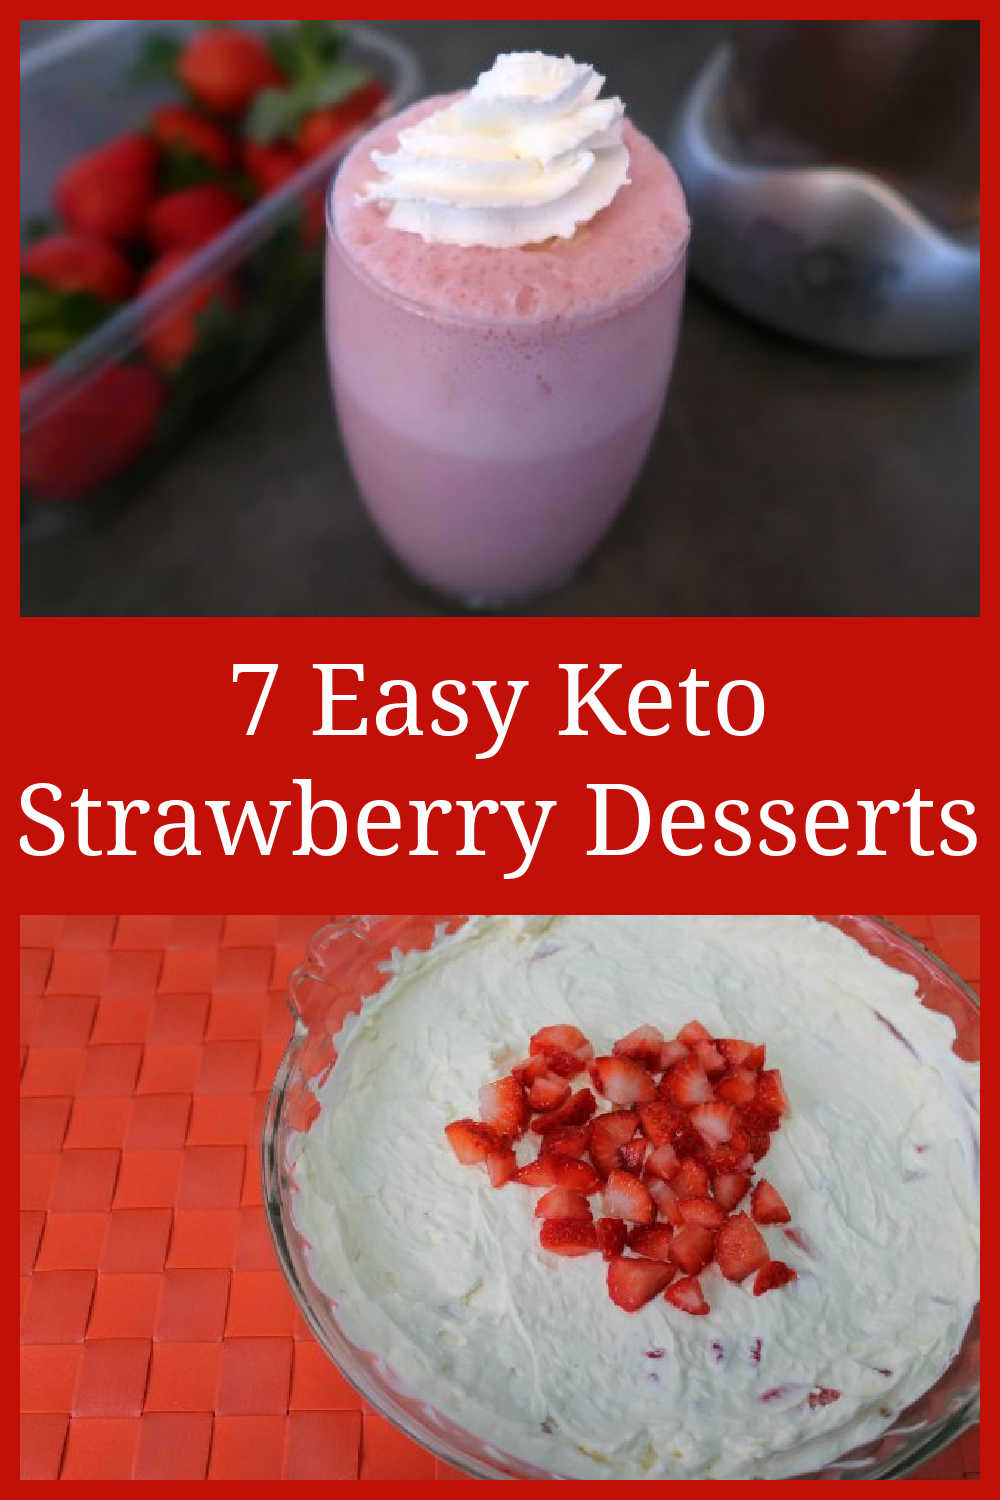 Keto Strawberry Desserts Recipes - The 7 Best Low Carb Easy Friendly Dessert Recipe Ideas With Strawberries - including no-bake, cream mousse cheesecake